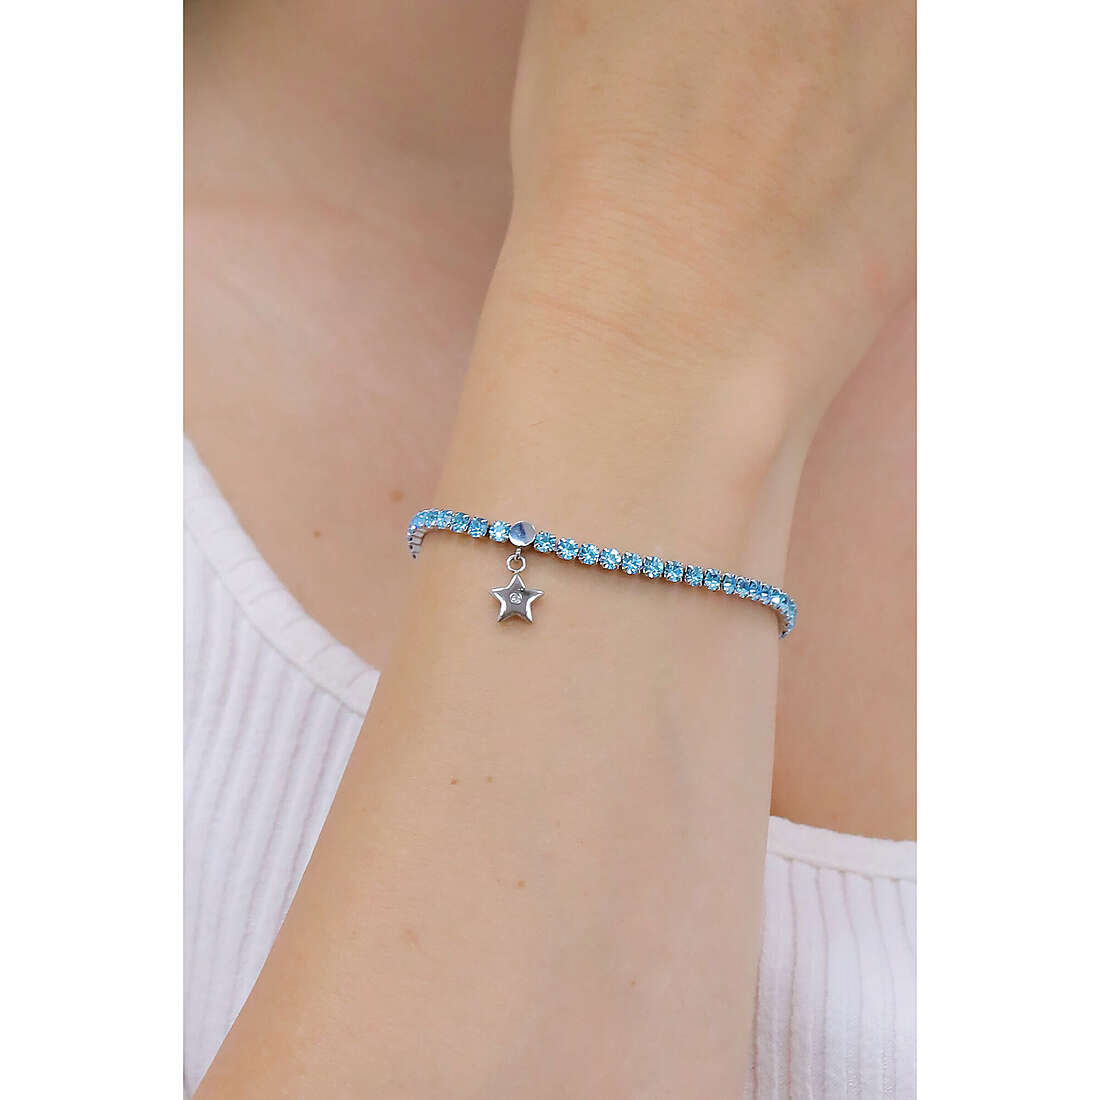 2Jewels Armbanden Youcolors frau 232394 Ich trage